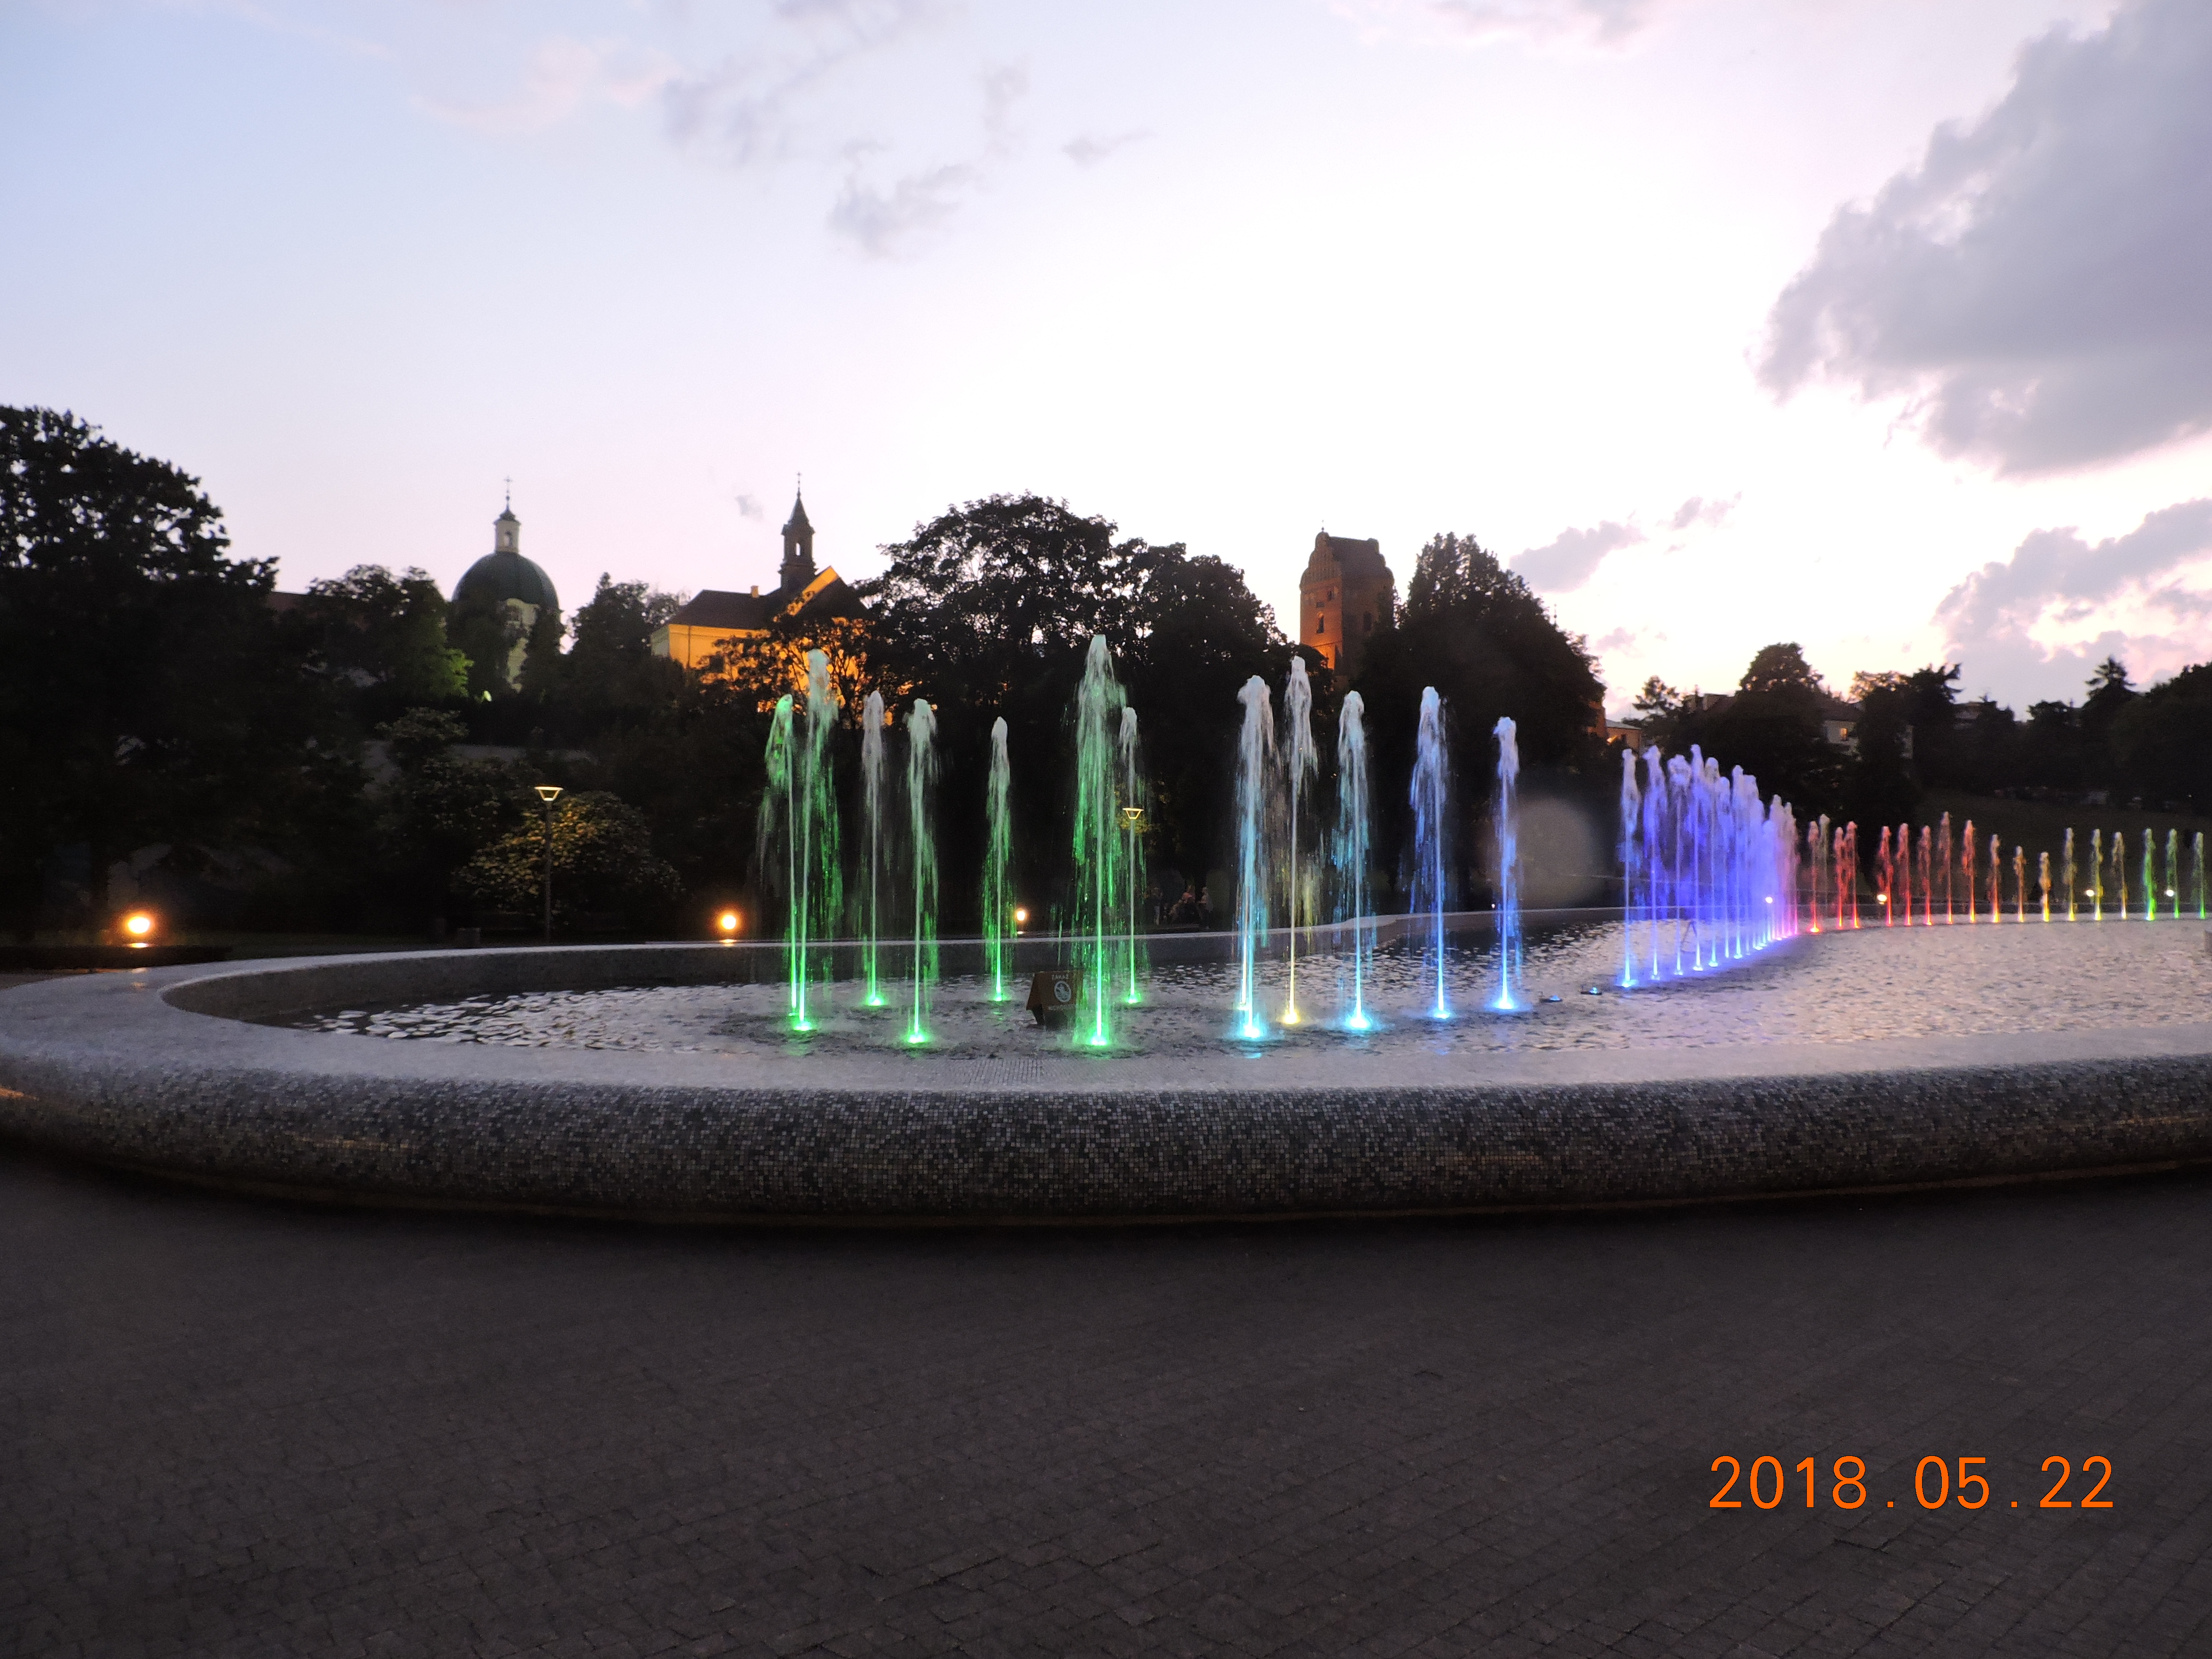 Warsaw Night. Fountains.